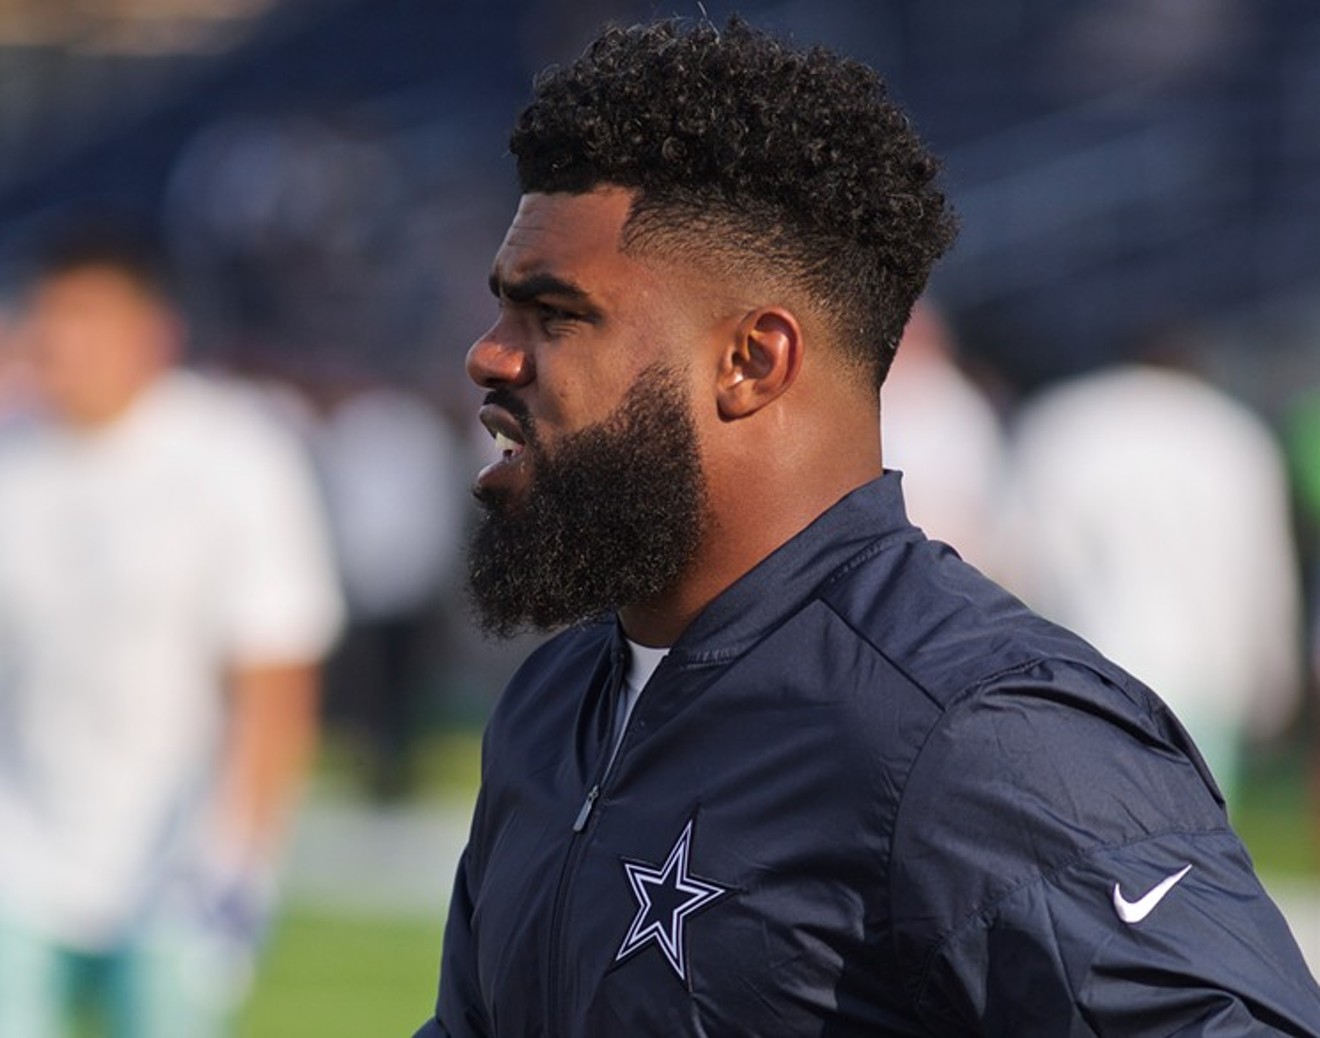 A Frisco man is suing the Dallas Cowboys and their star running back, Ezekiel Elliott, for $20 million.